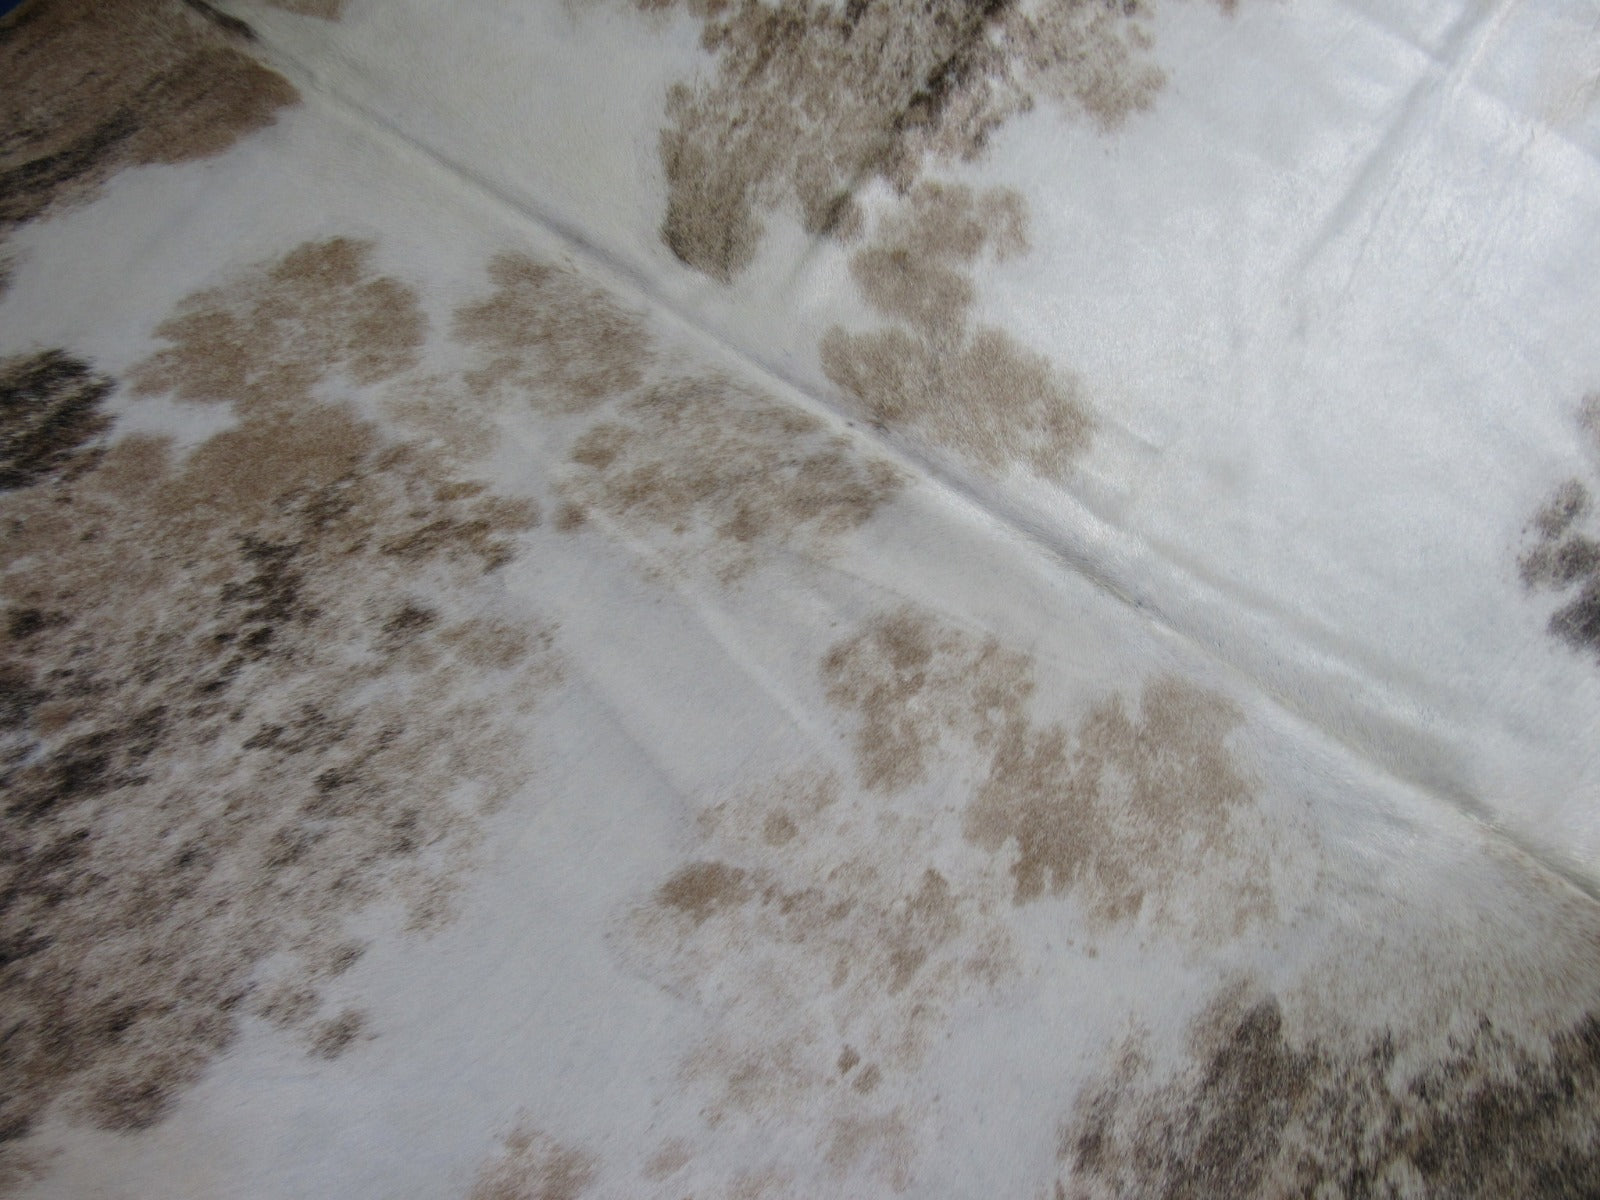 Light Brindle Spotted Cowhide Rug (off-white/ light beige background) Size: 8x6.5 feet O-280